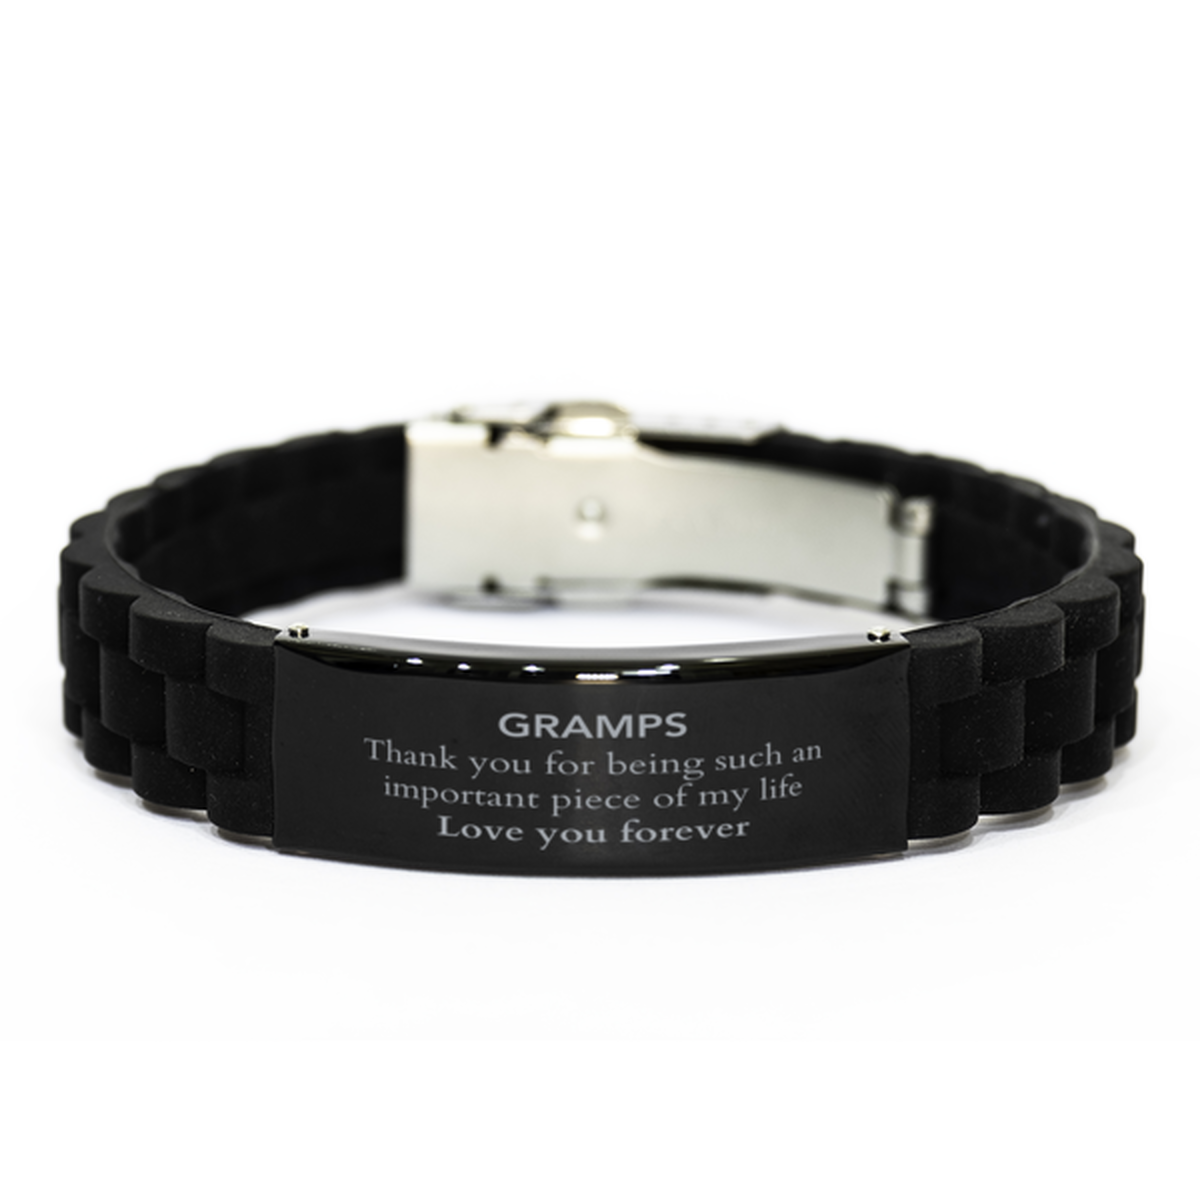 Appropriate Gramps Black Glidelock Clasp Bracelet Epic Birthday Gifts for Gramps Thank you for being such an important piece of my life Gramps Christmas Mothers Fathers Day